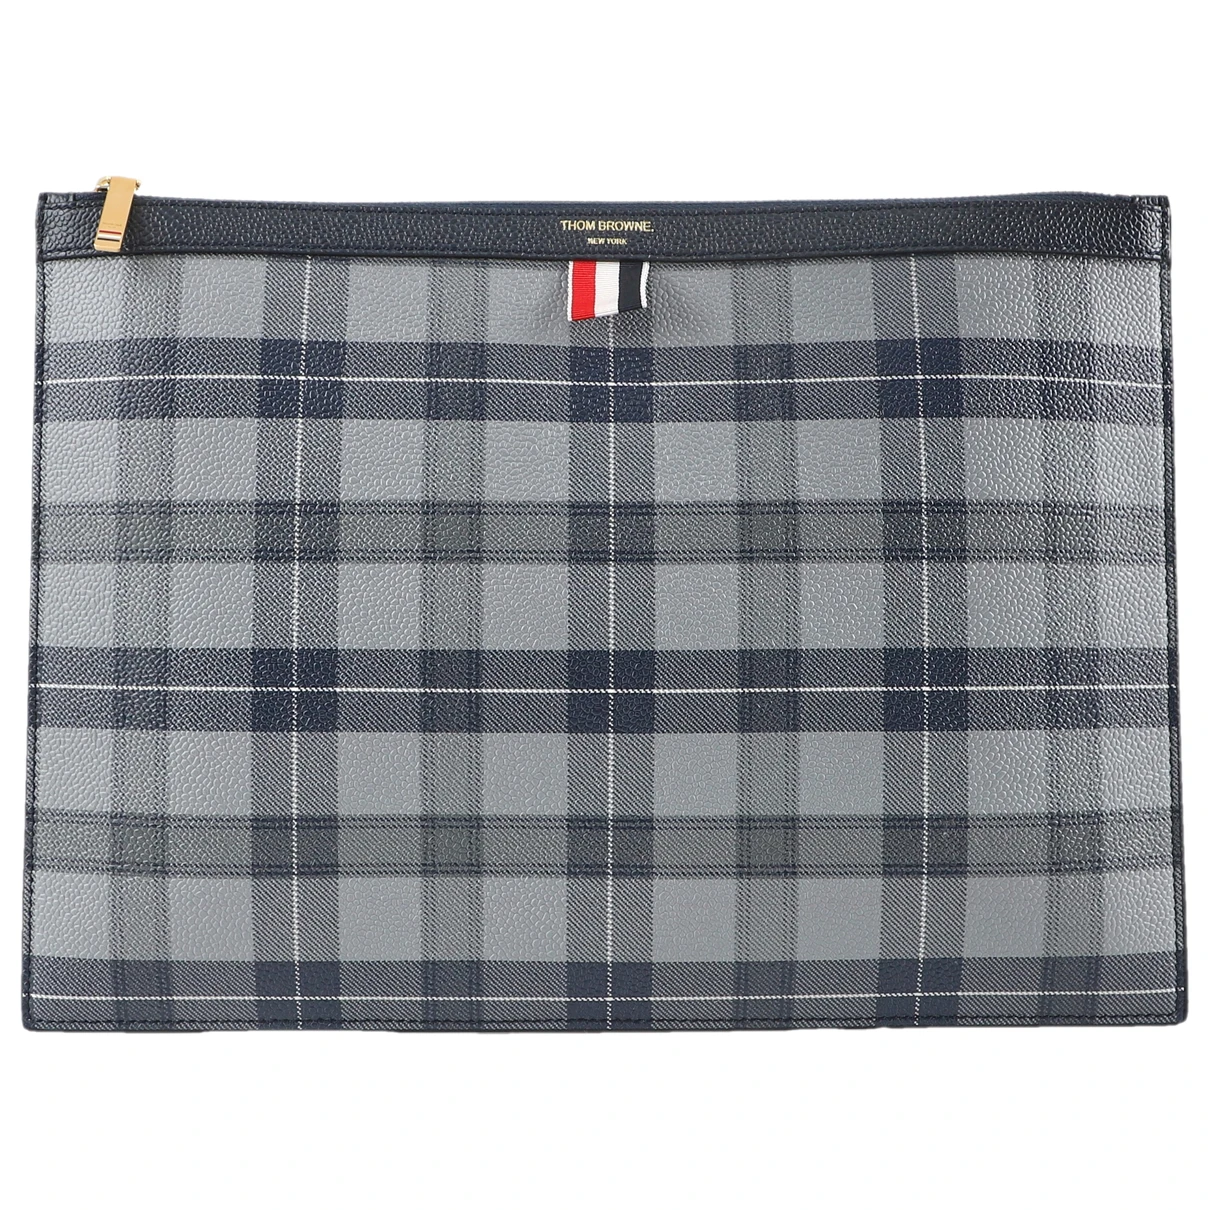 Pre-owned Thom Browne Leather Clutch Bag In Blue